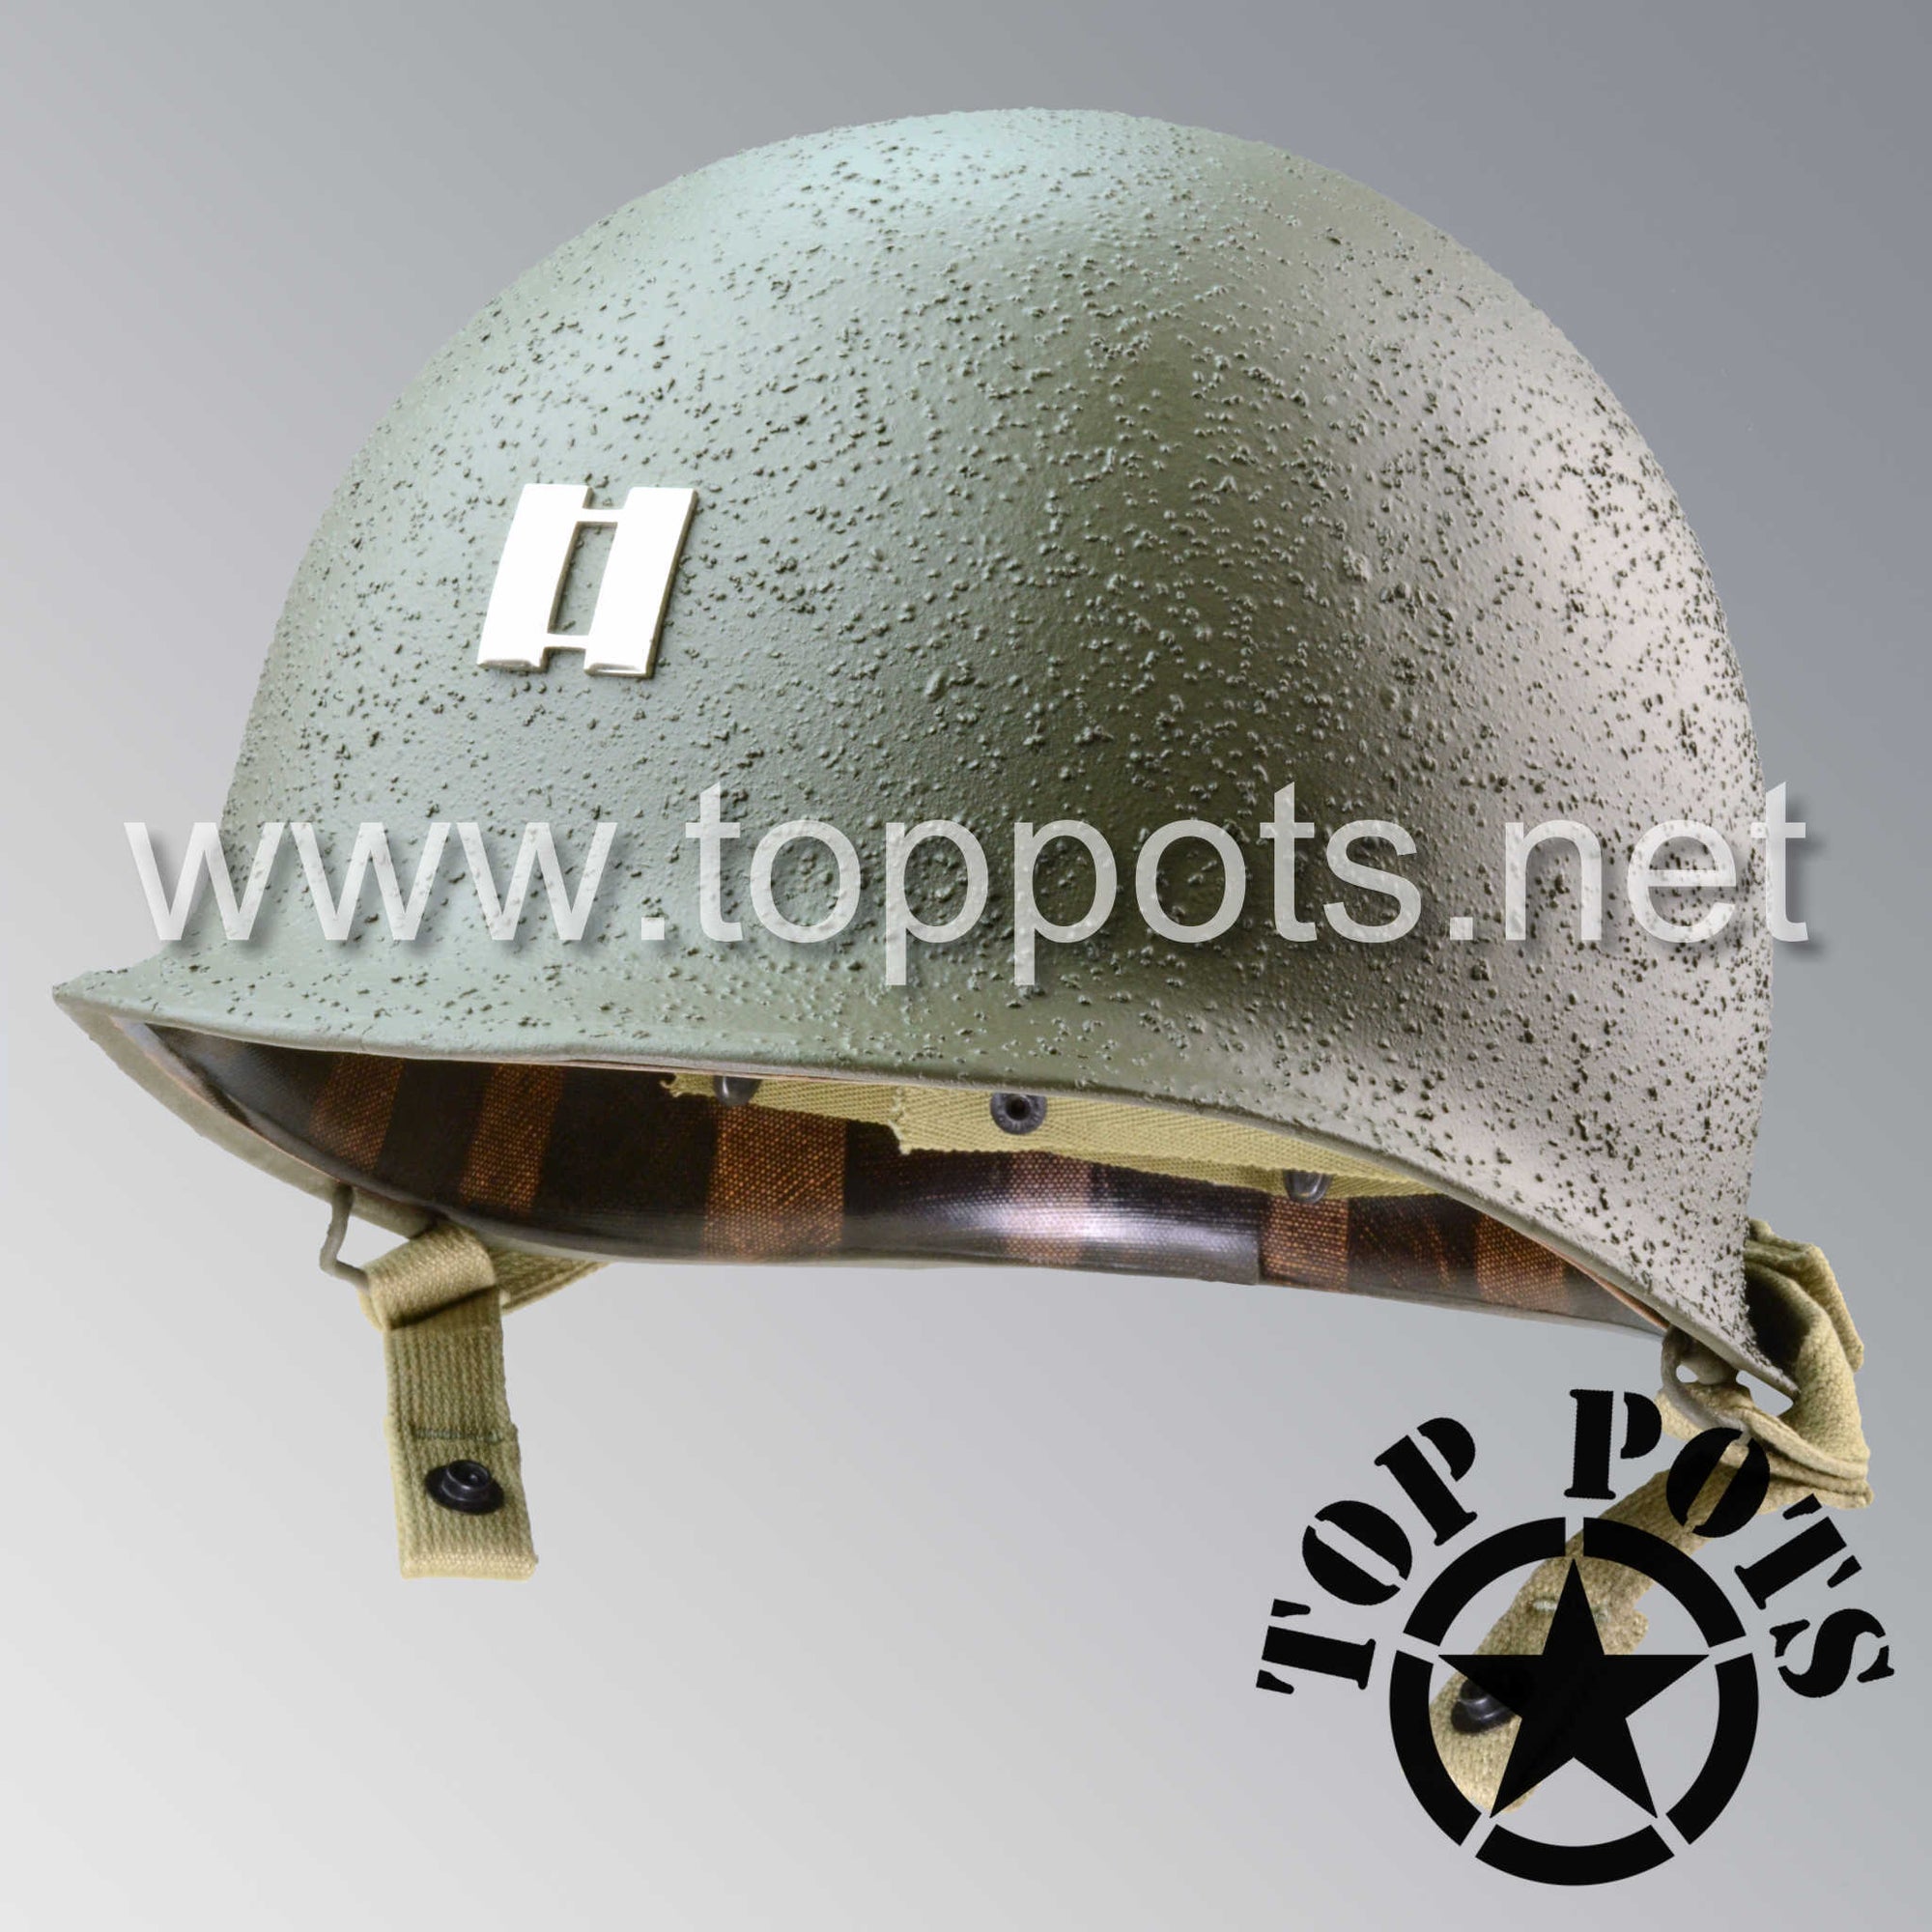 WWII US Army Restored Original M1C Airborne Paratrooper Helmet Swivel Bale Shell with Metal Captain Rank and Chinstraps